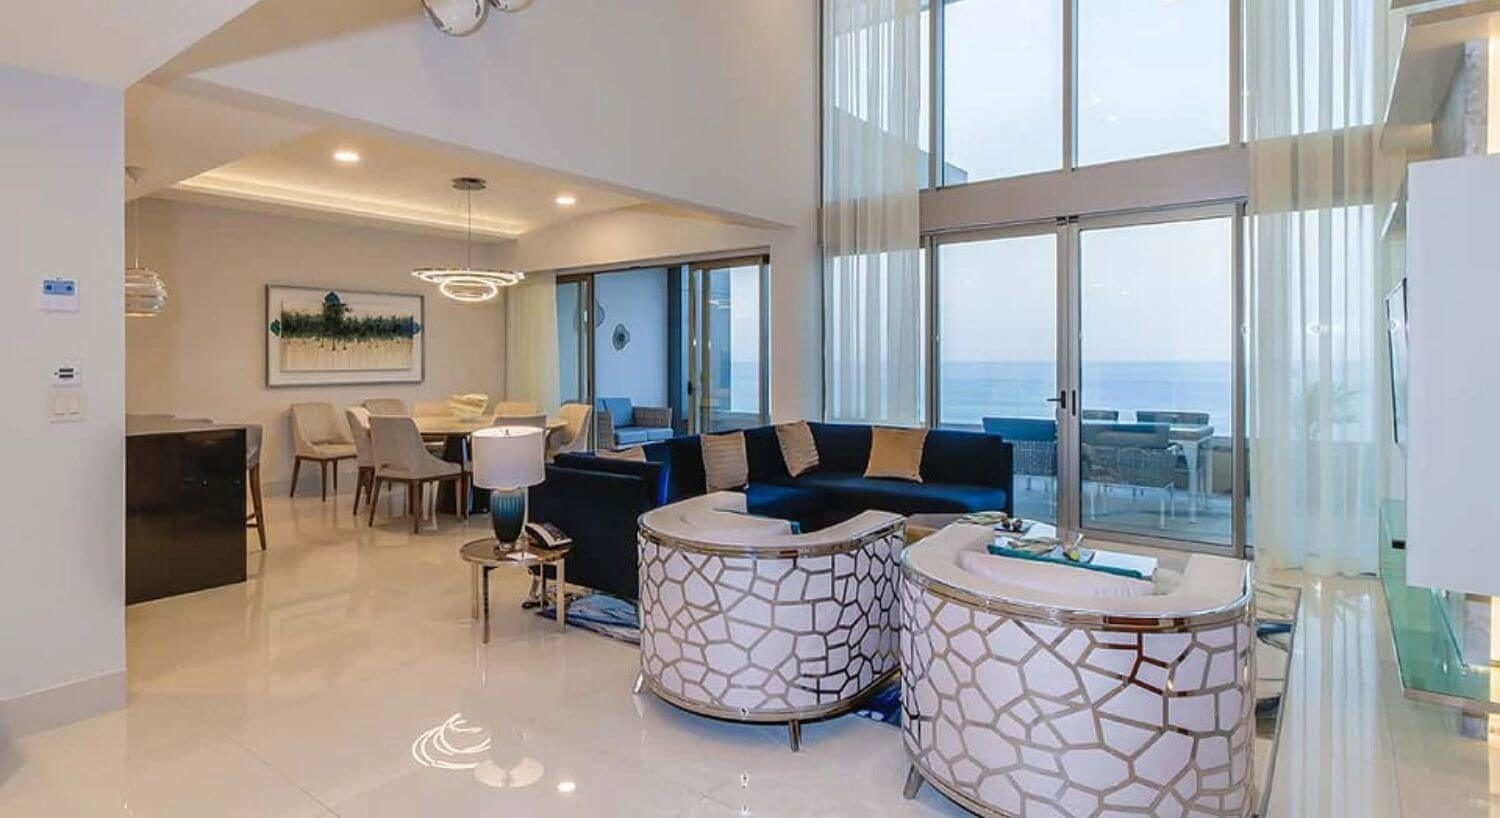 A large open floor plan living room with multi story ceilings, adining area with blue sofas, plush white armchairs, nightstands with lamps, a flat screen TV, a round dining table and 8 chairs, and sliding doors leading out to a private balcony with patio furniture and ocean views.